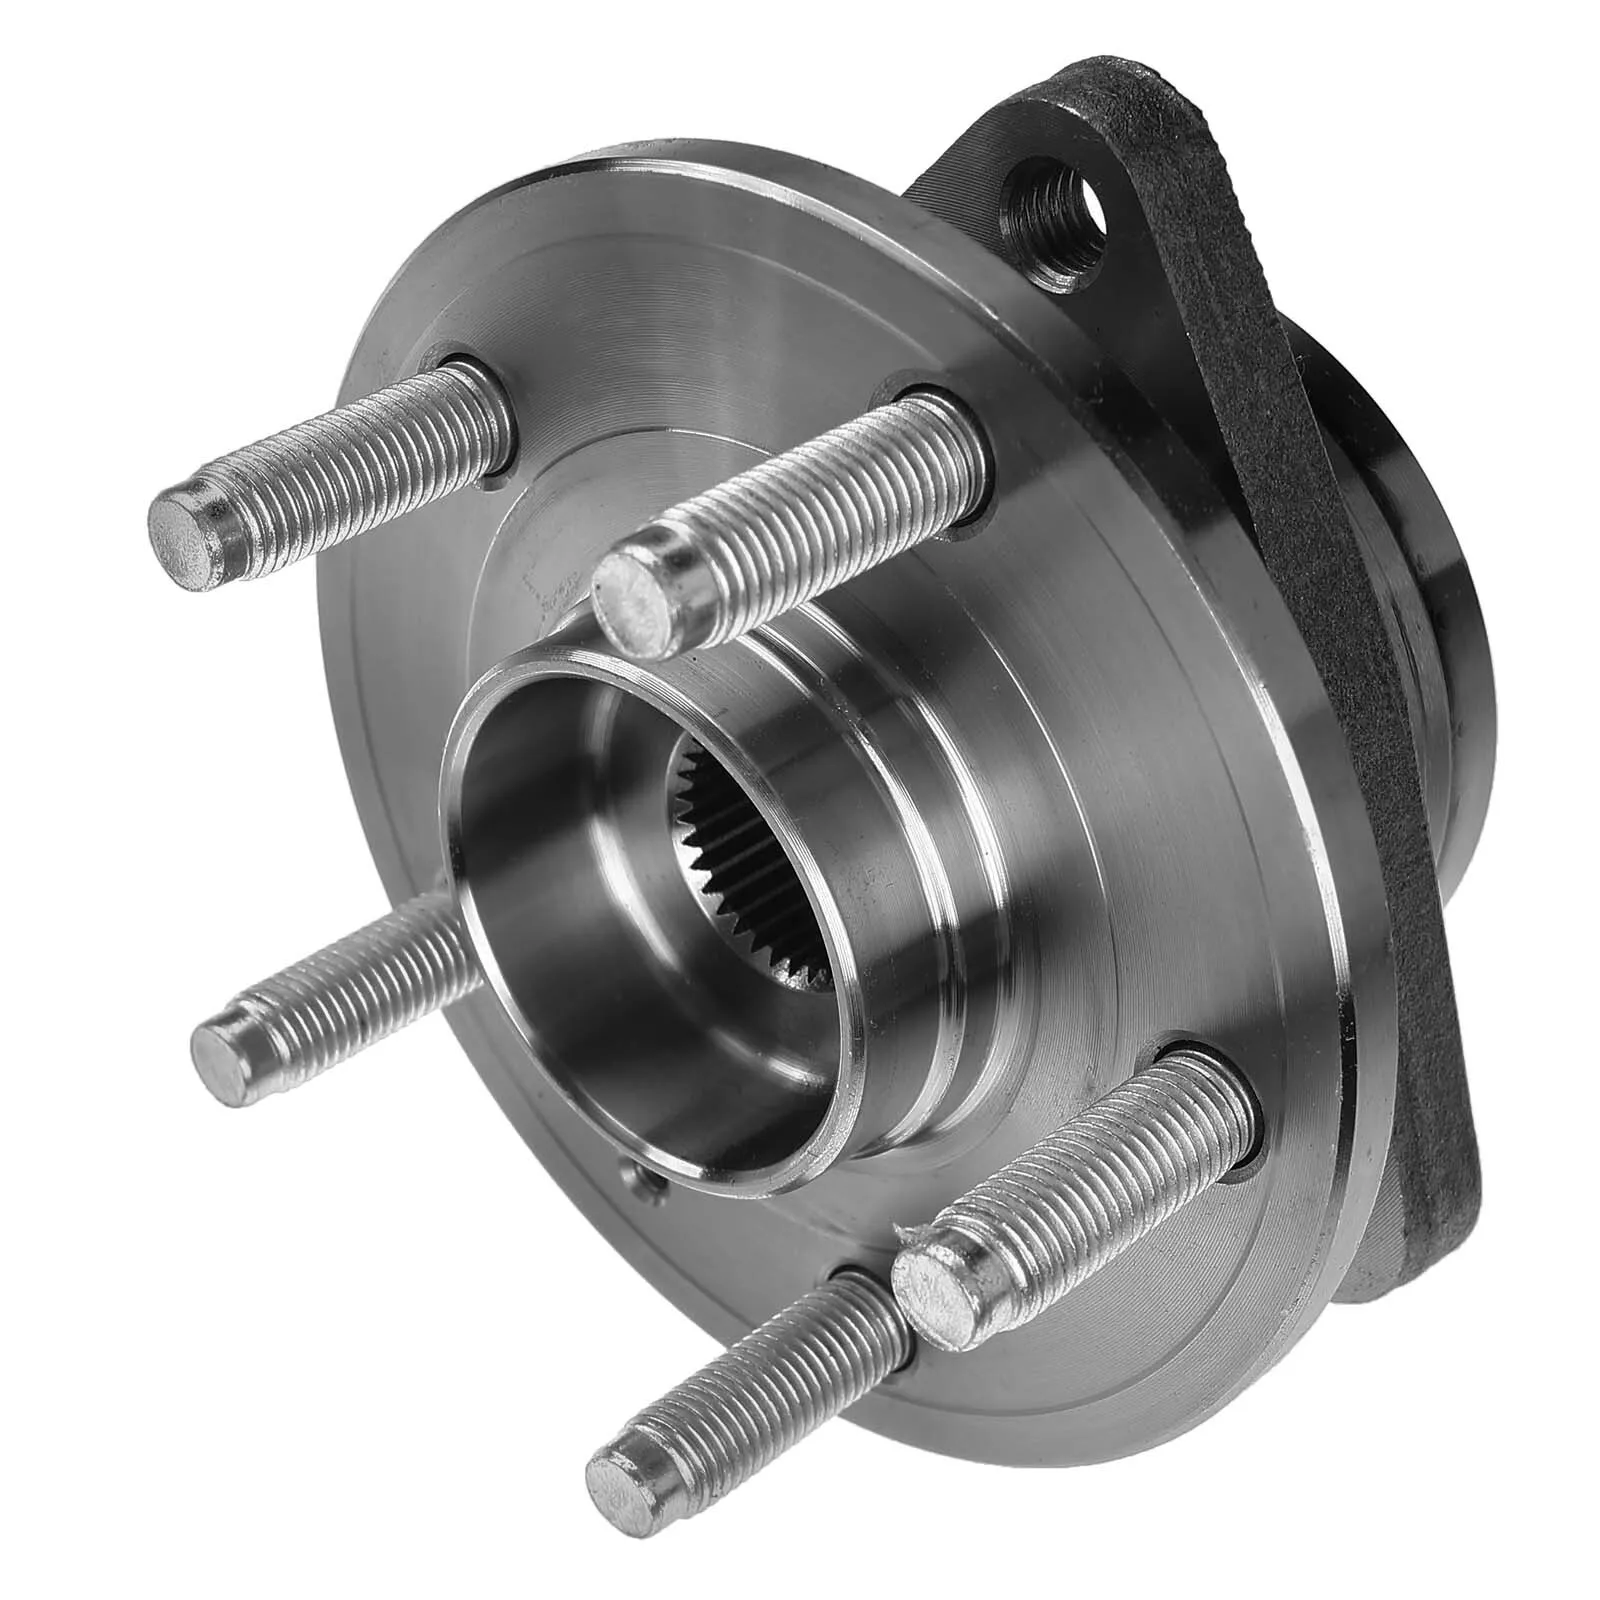 

A3 Repair Shop Front LH / RH Wheel Bearing Hub for Chevrolet 2011-2015 Cruze Limited 2016